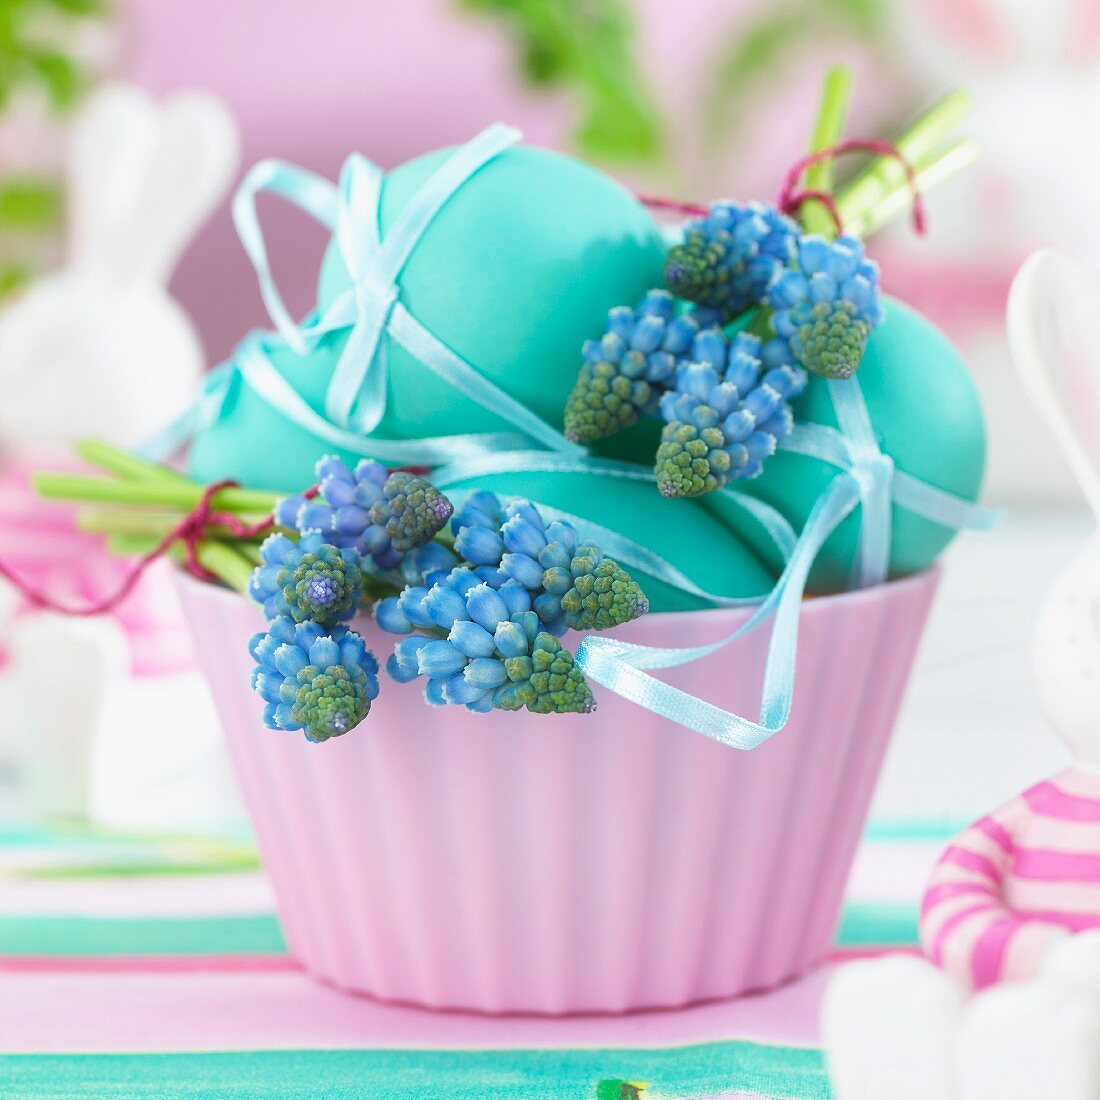 Blue Easter eggs and grape hyacinths in a bowl